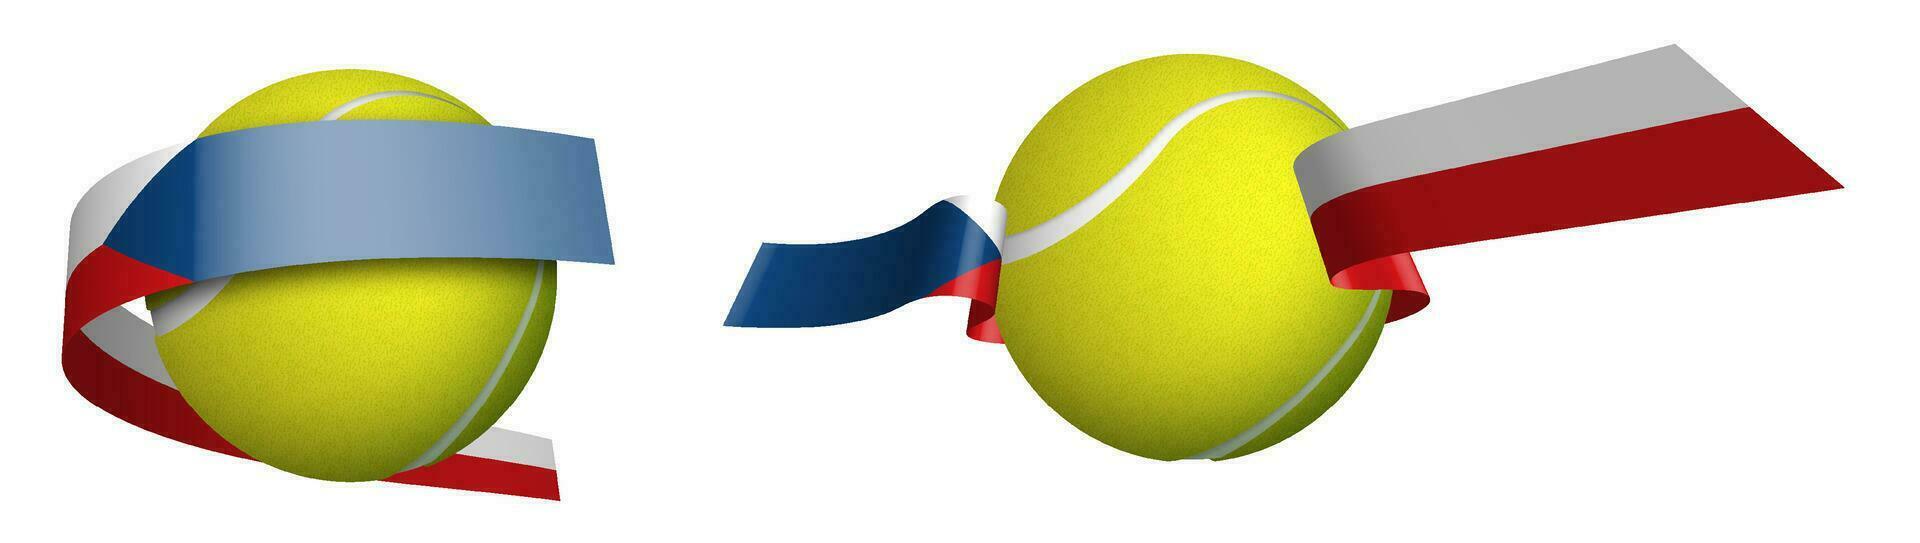 sports tennis ball in ribbons with colors of Czech Republic flag. Isolated vector on white background